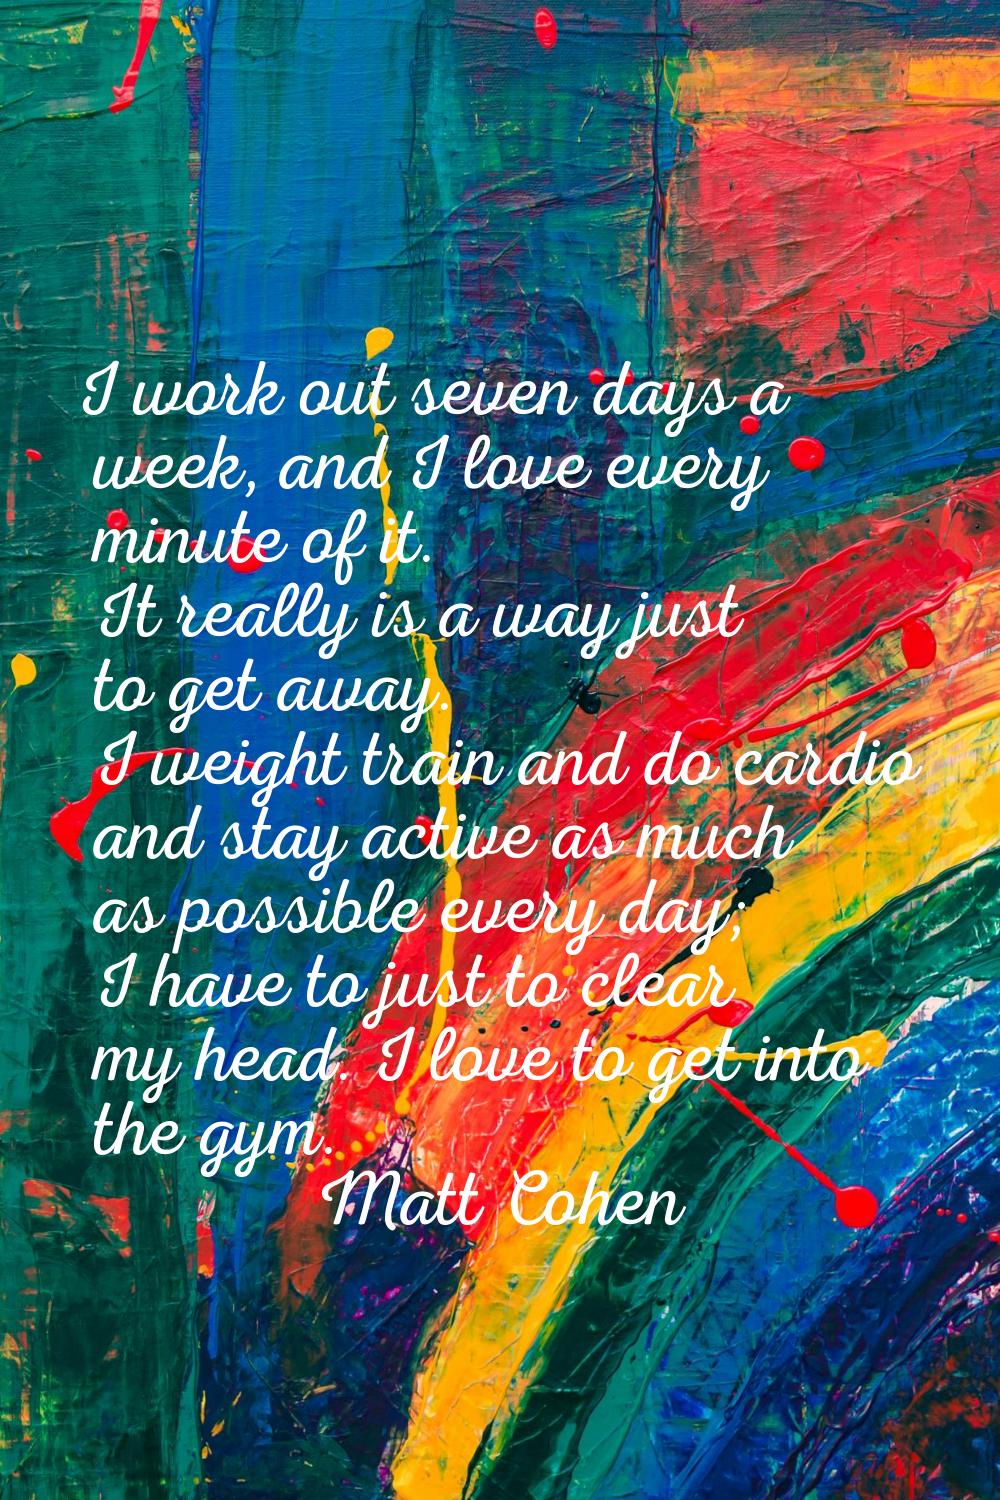 I work out seven days a week, and I love every minute of it. It really is a way just to get away. I